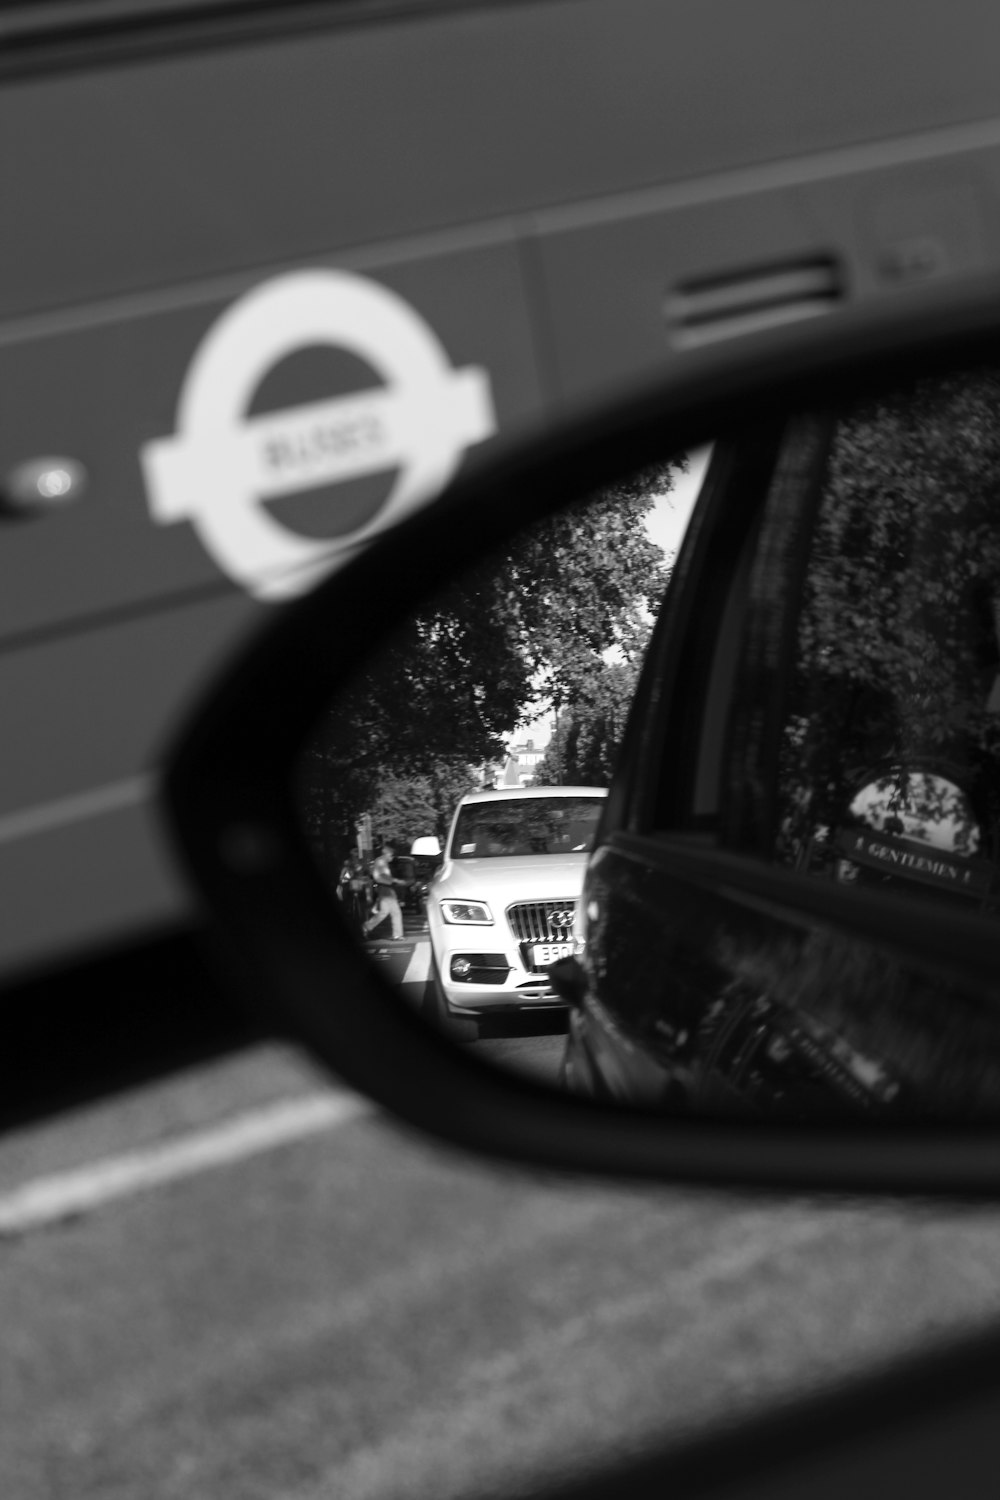 a rear view mirror on a car with a bus in the background